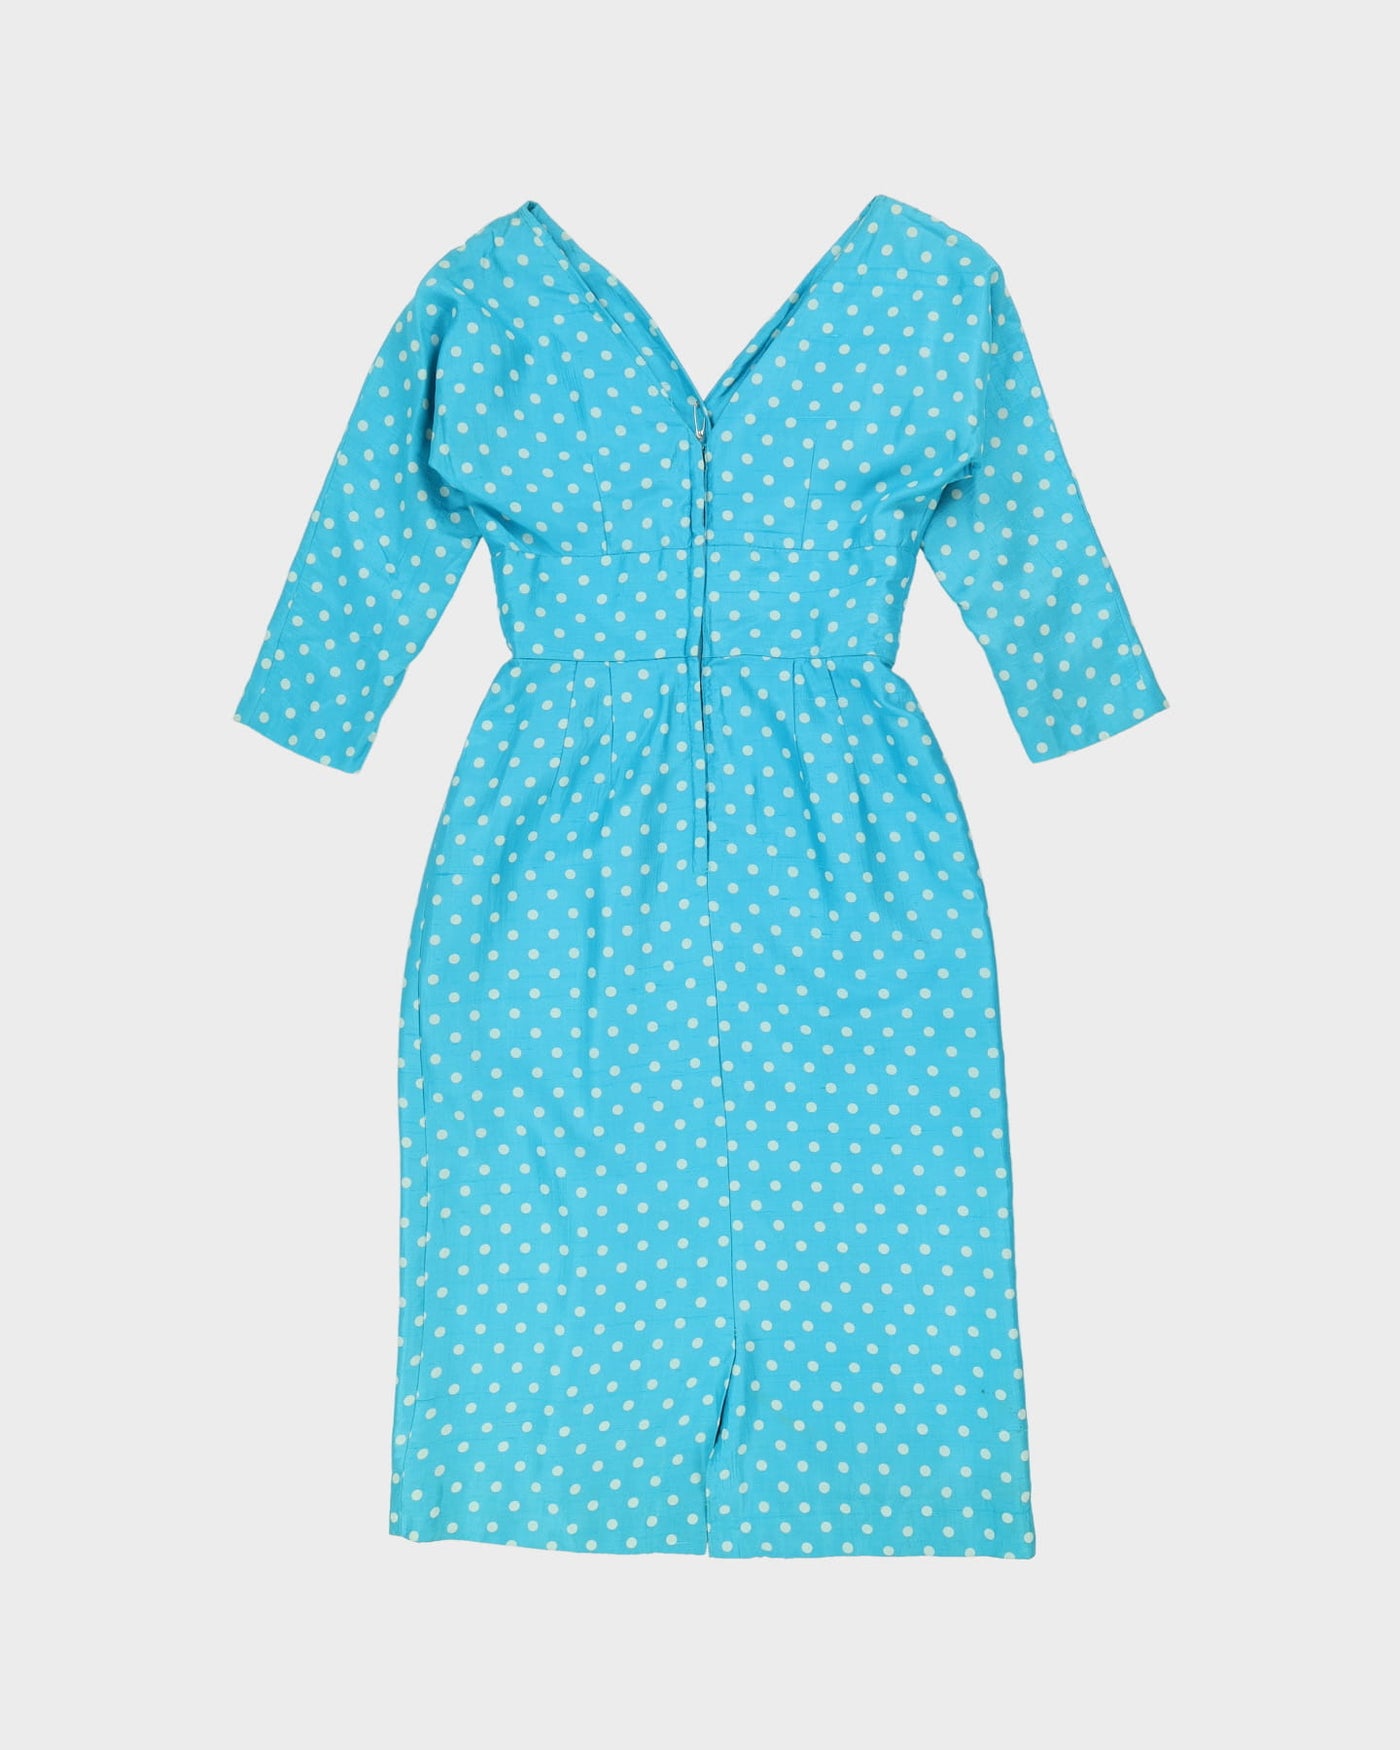 Vintage 1950s Blue Spotted Wiggle Dress - XS / S